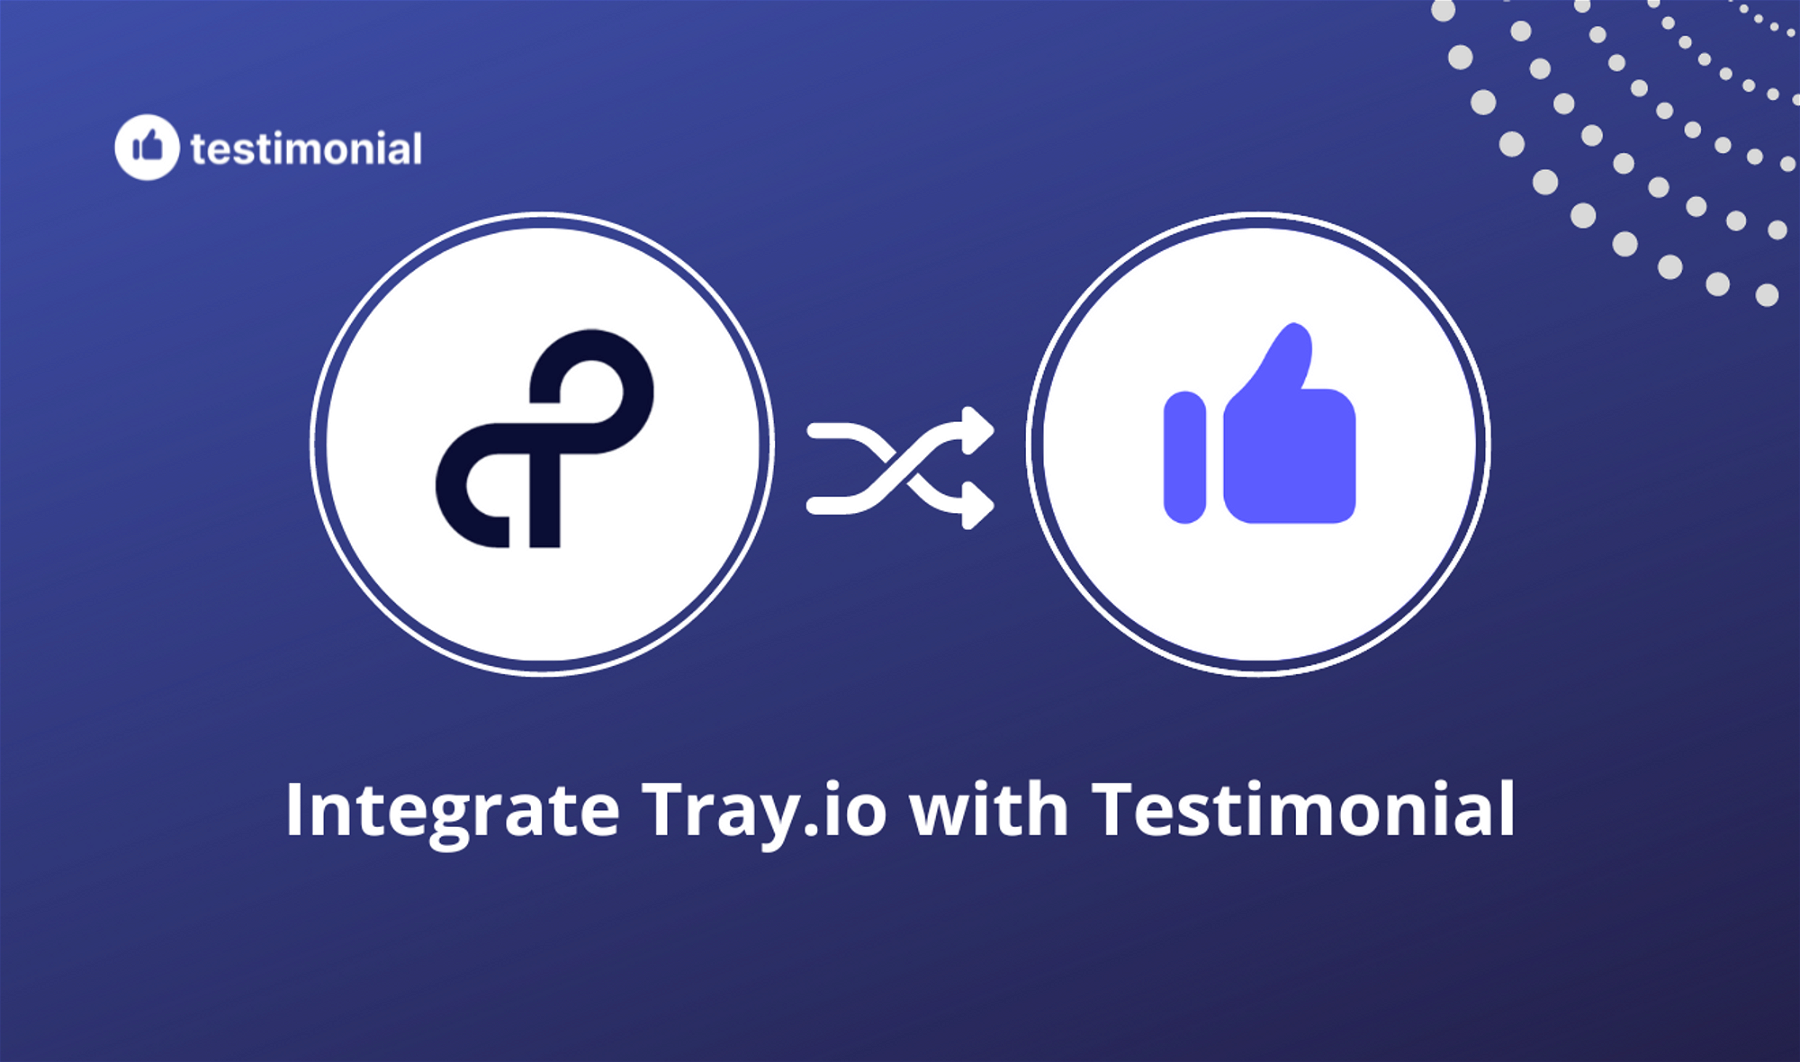 How to integrate Tray.io with Testimonial